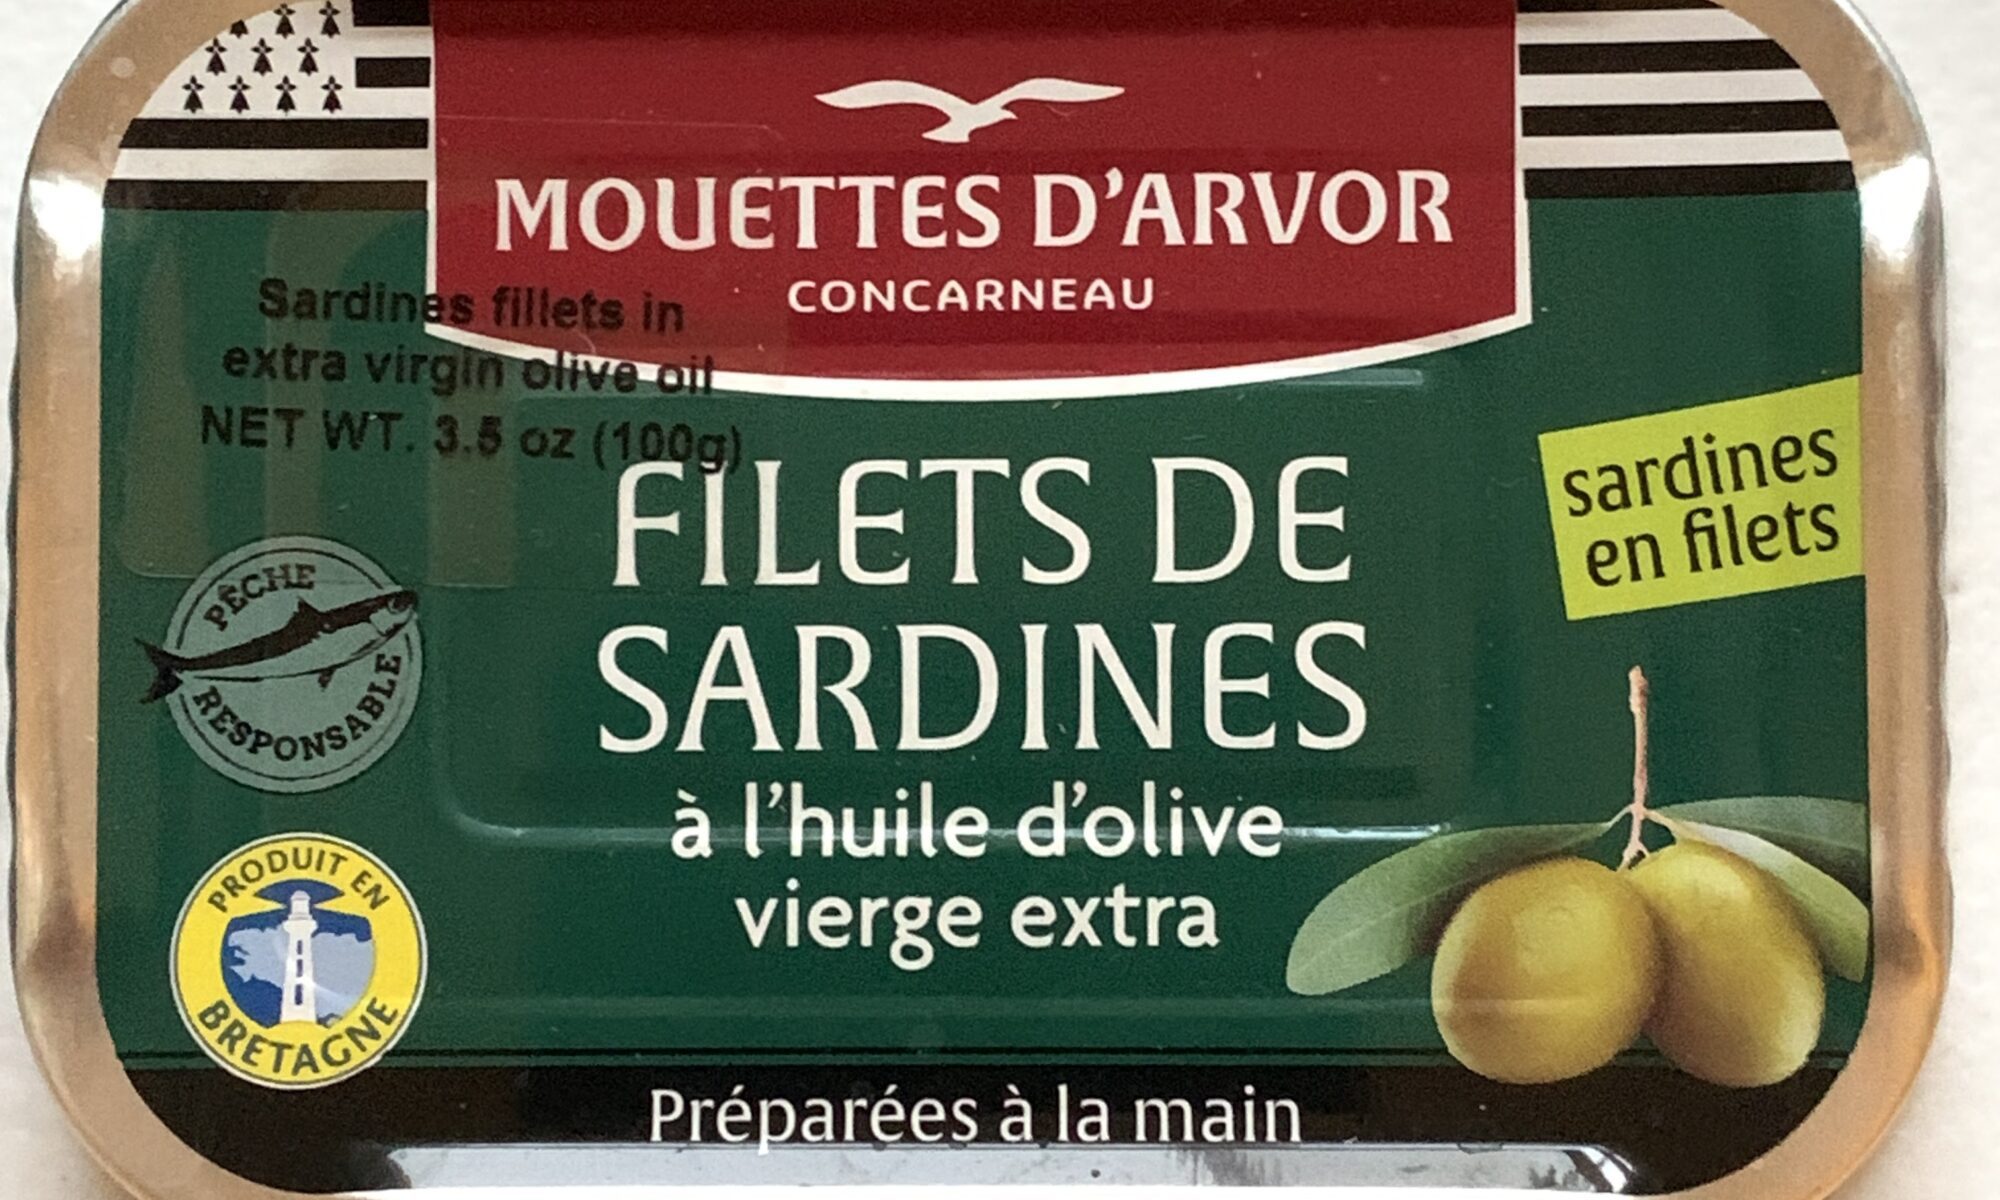 Image of the front of a tin of Les Mouettes d’Arvor Sardine Fillets in Extra Virgin Olive Oil